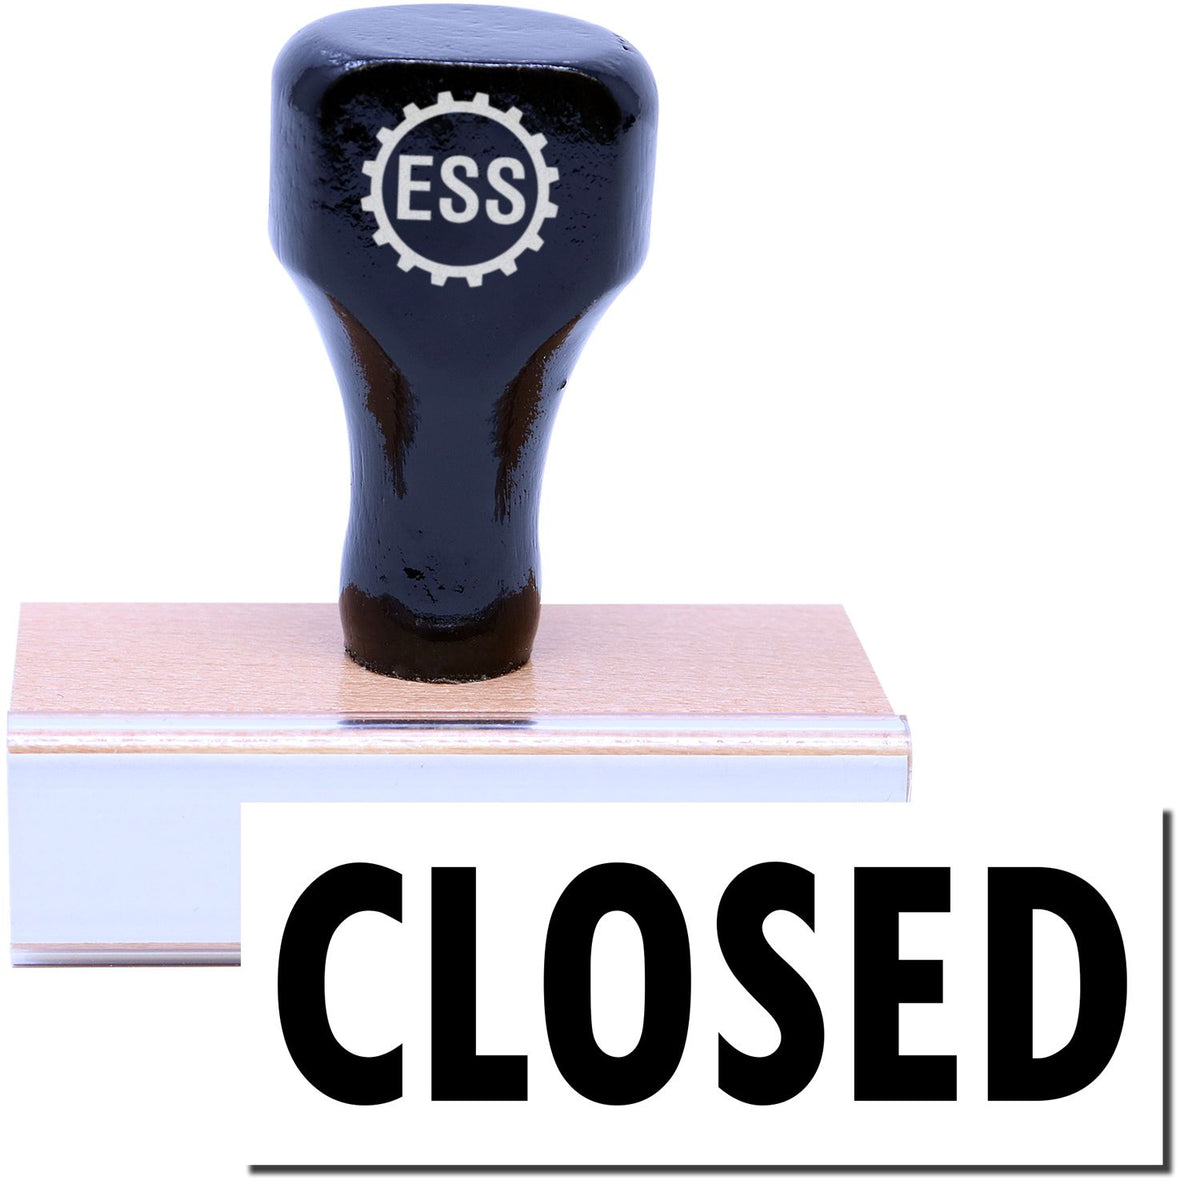 A stock office rubber stamp with a stamped image showing how the text &quot;CLOSED&quot; in a large font is displayed after stamping.